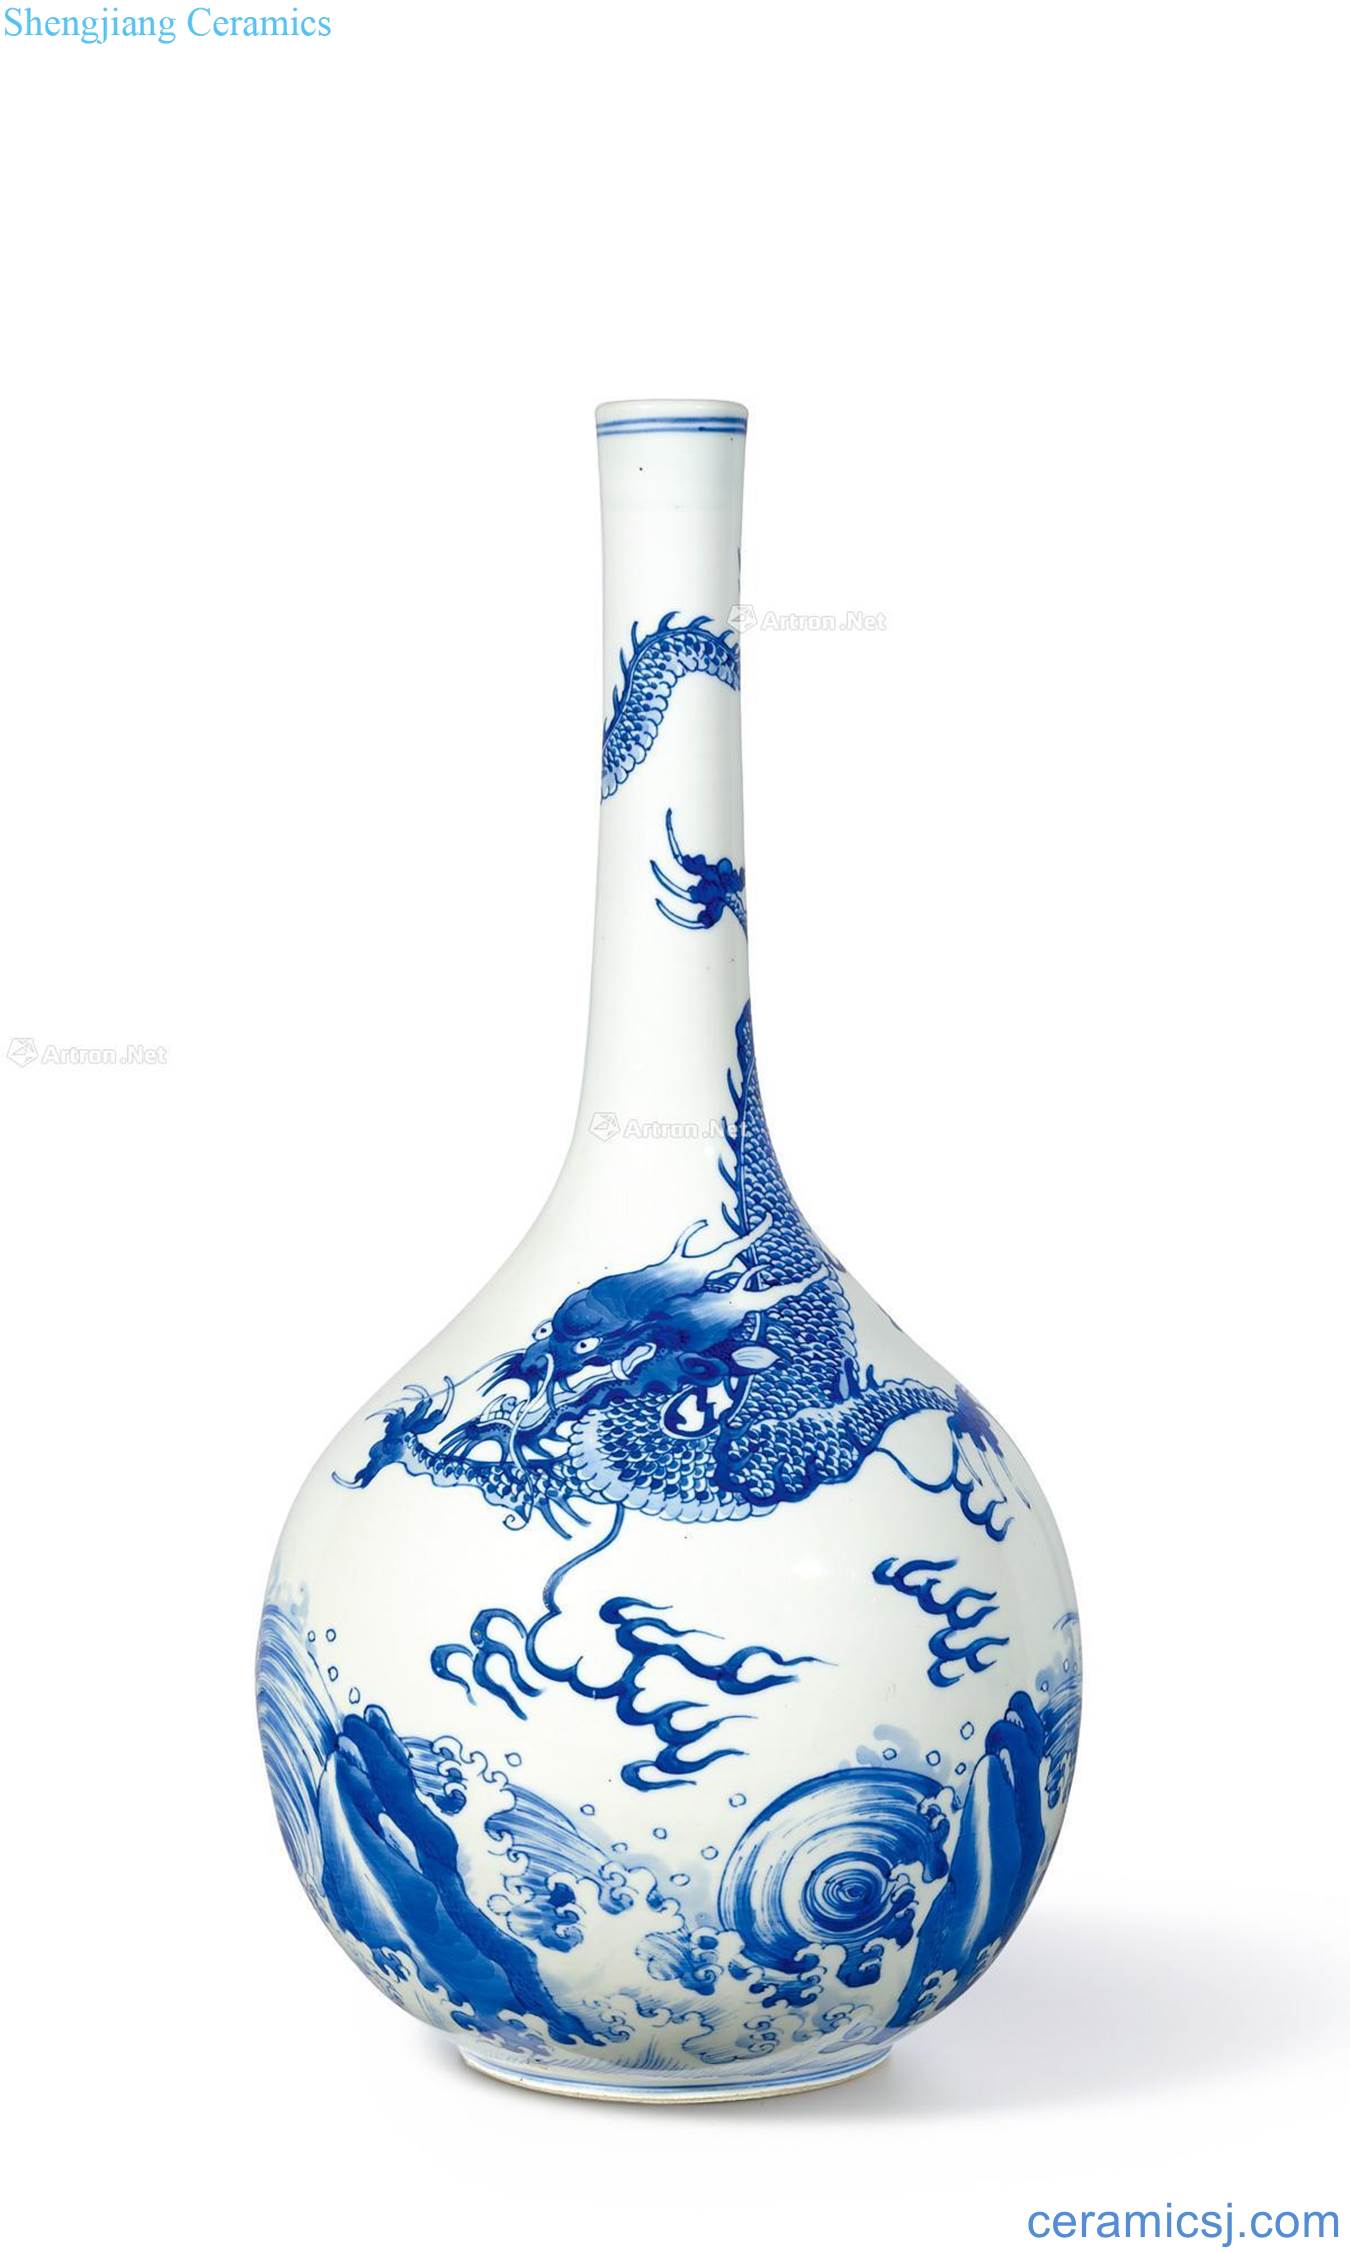 In the 18th century qing Blue and white carp jump longmen flask